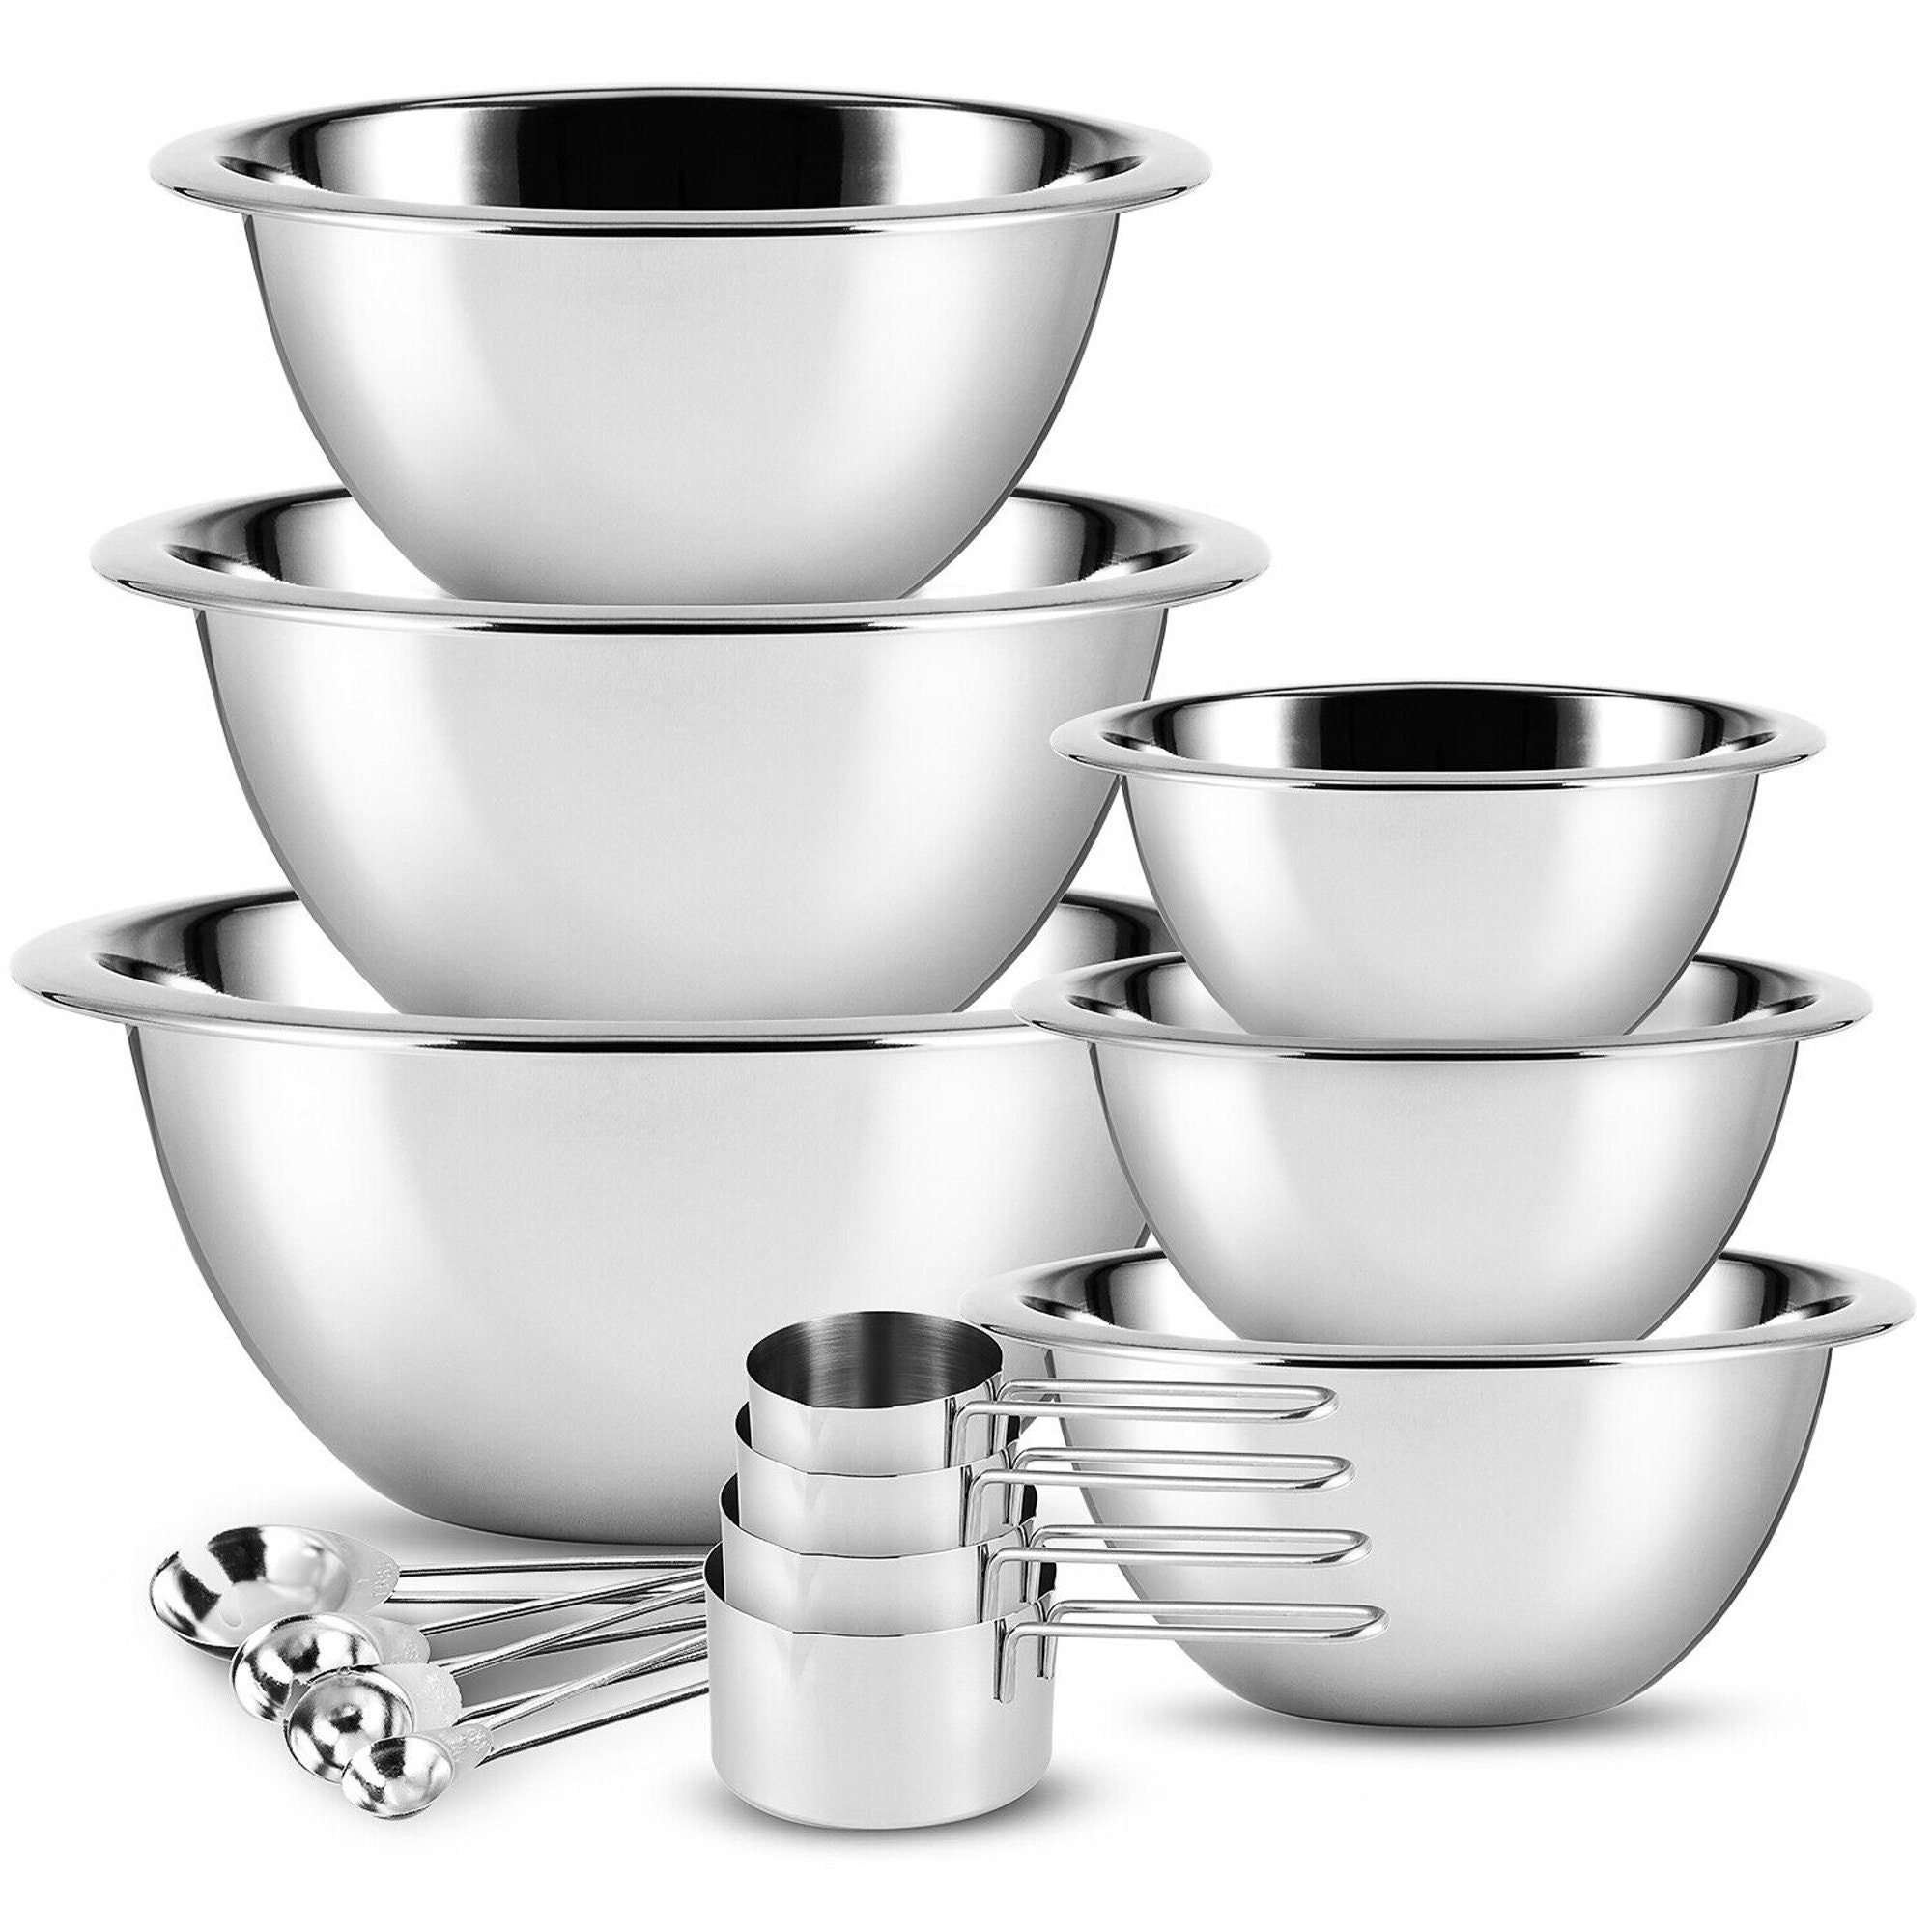 Workhorse Stainless Steel Mixing Bowls - Made in the USA